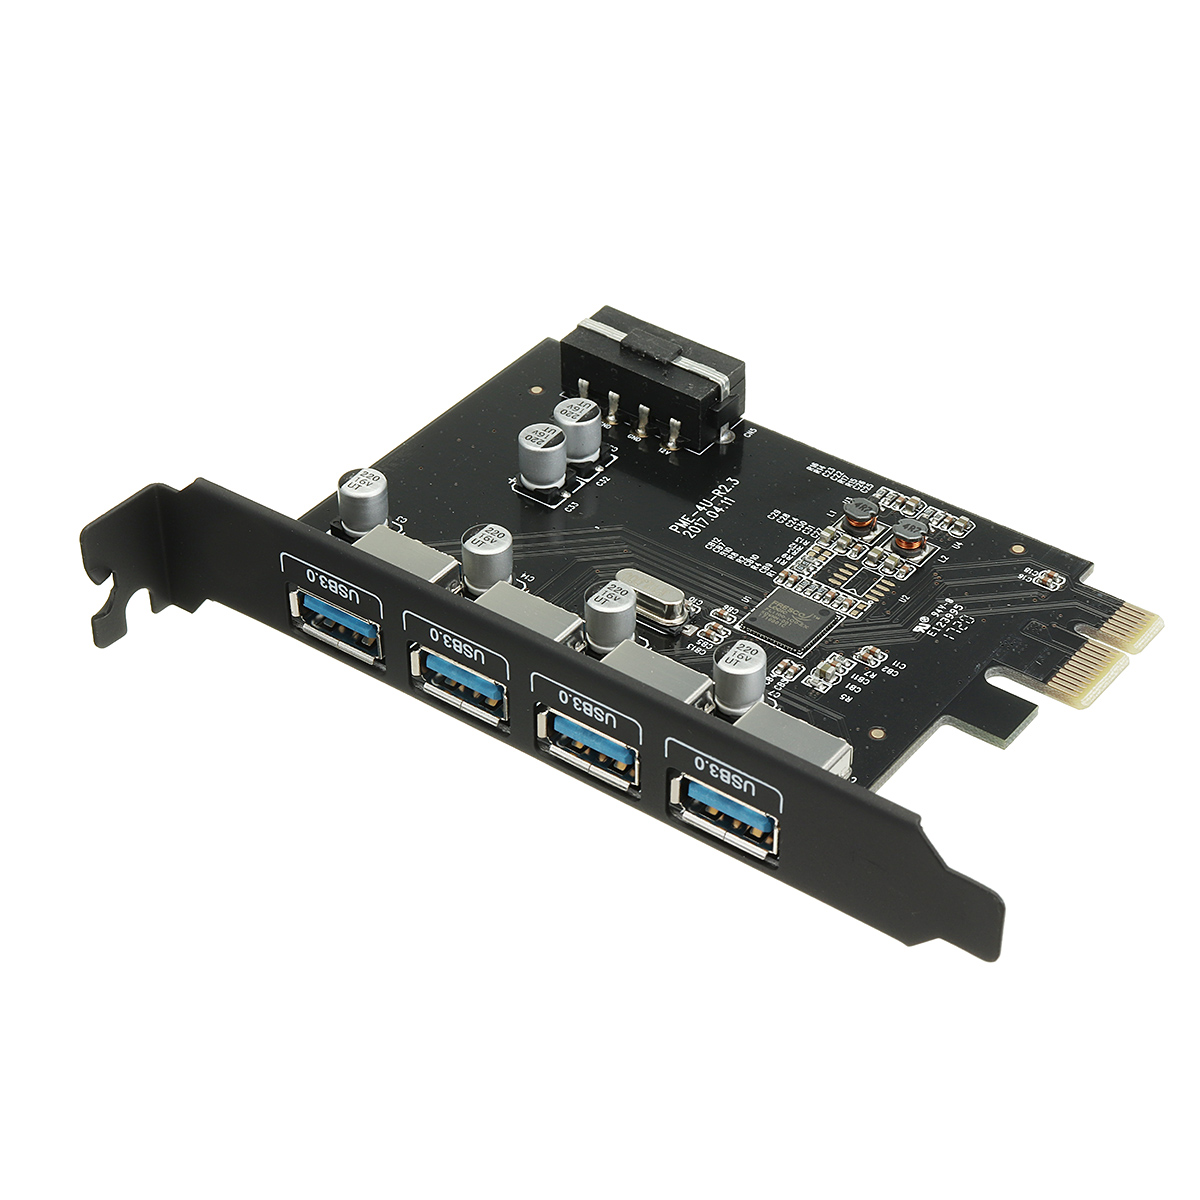 Usb 3 Cards For Mac